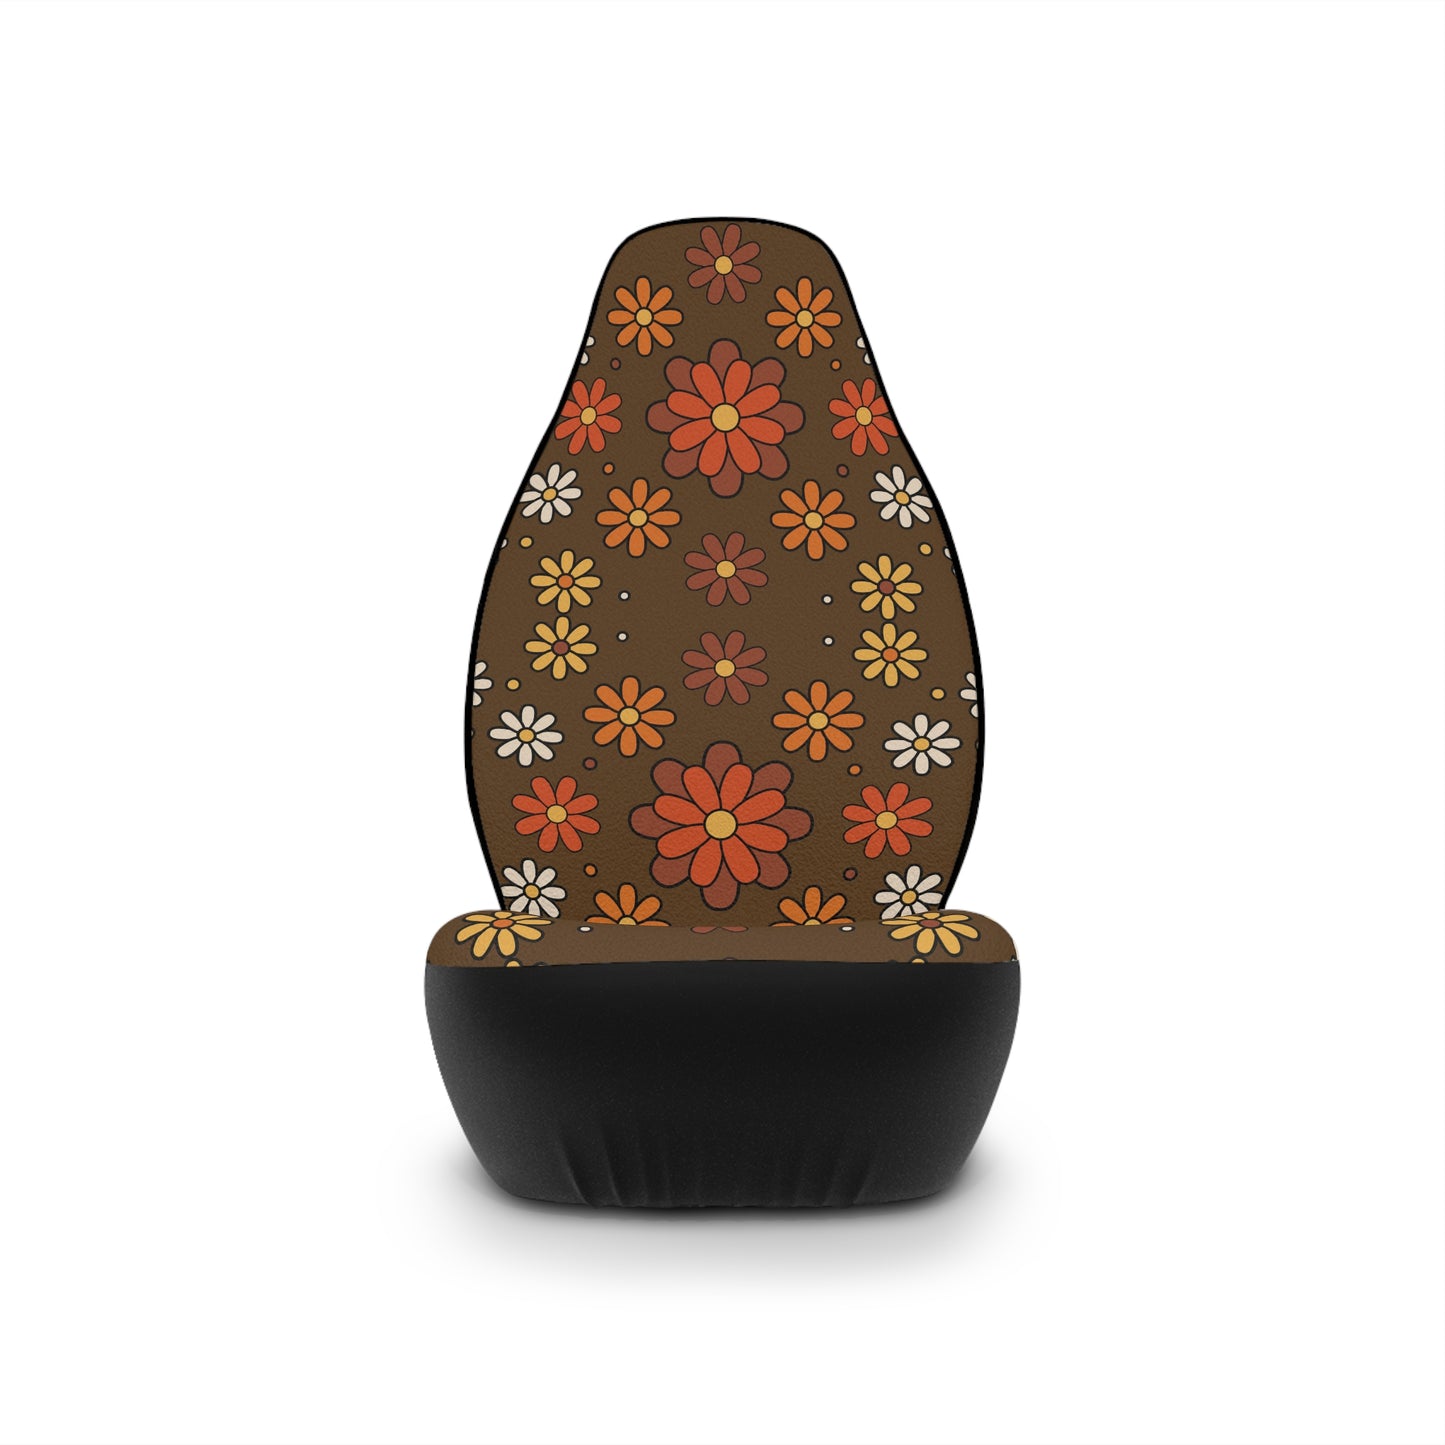 Retro 60s 70s Groovy Mod Daisy Floral Mid Century Brown & Orange Car Seat Covers